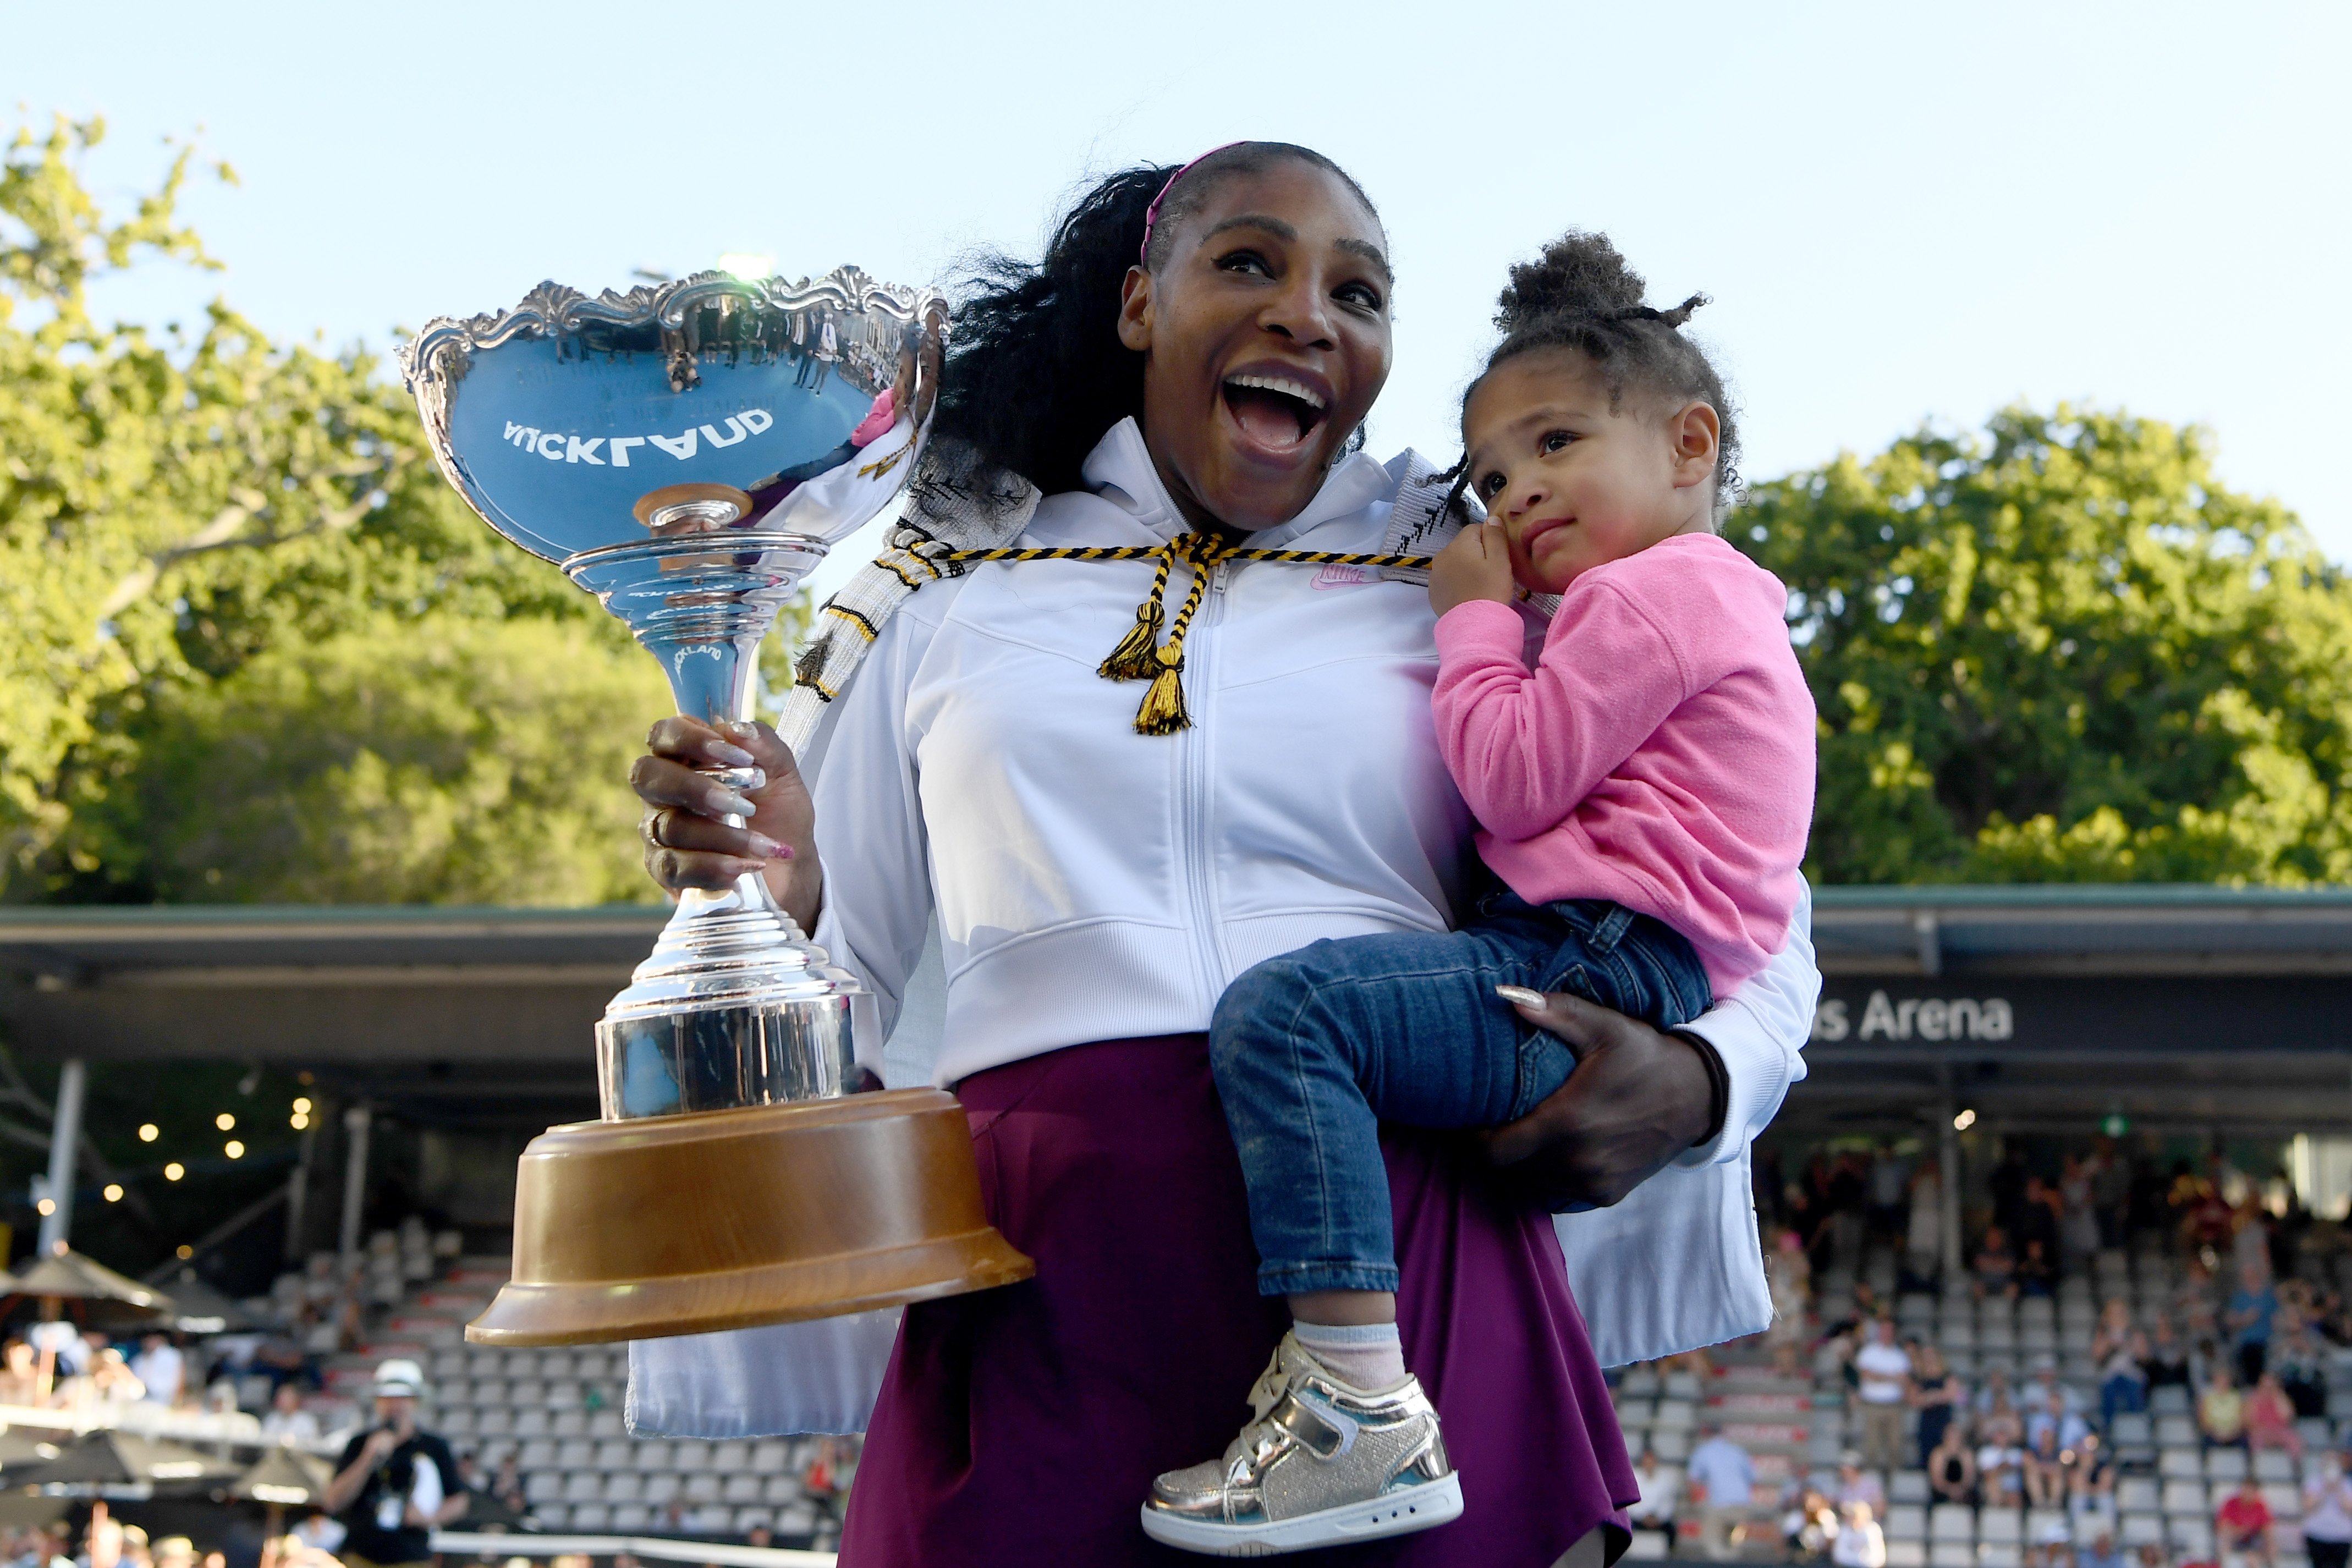 Serena Williams with daughter Alexis Olympia after winning the final match against Jessica Pegula, 2020, Auckland, New Zealand. | Photo: Getty Images